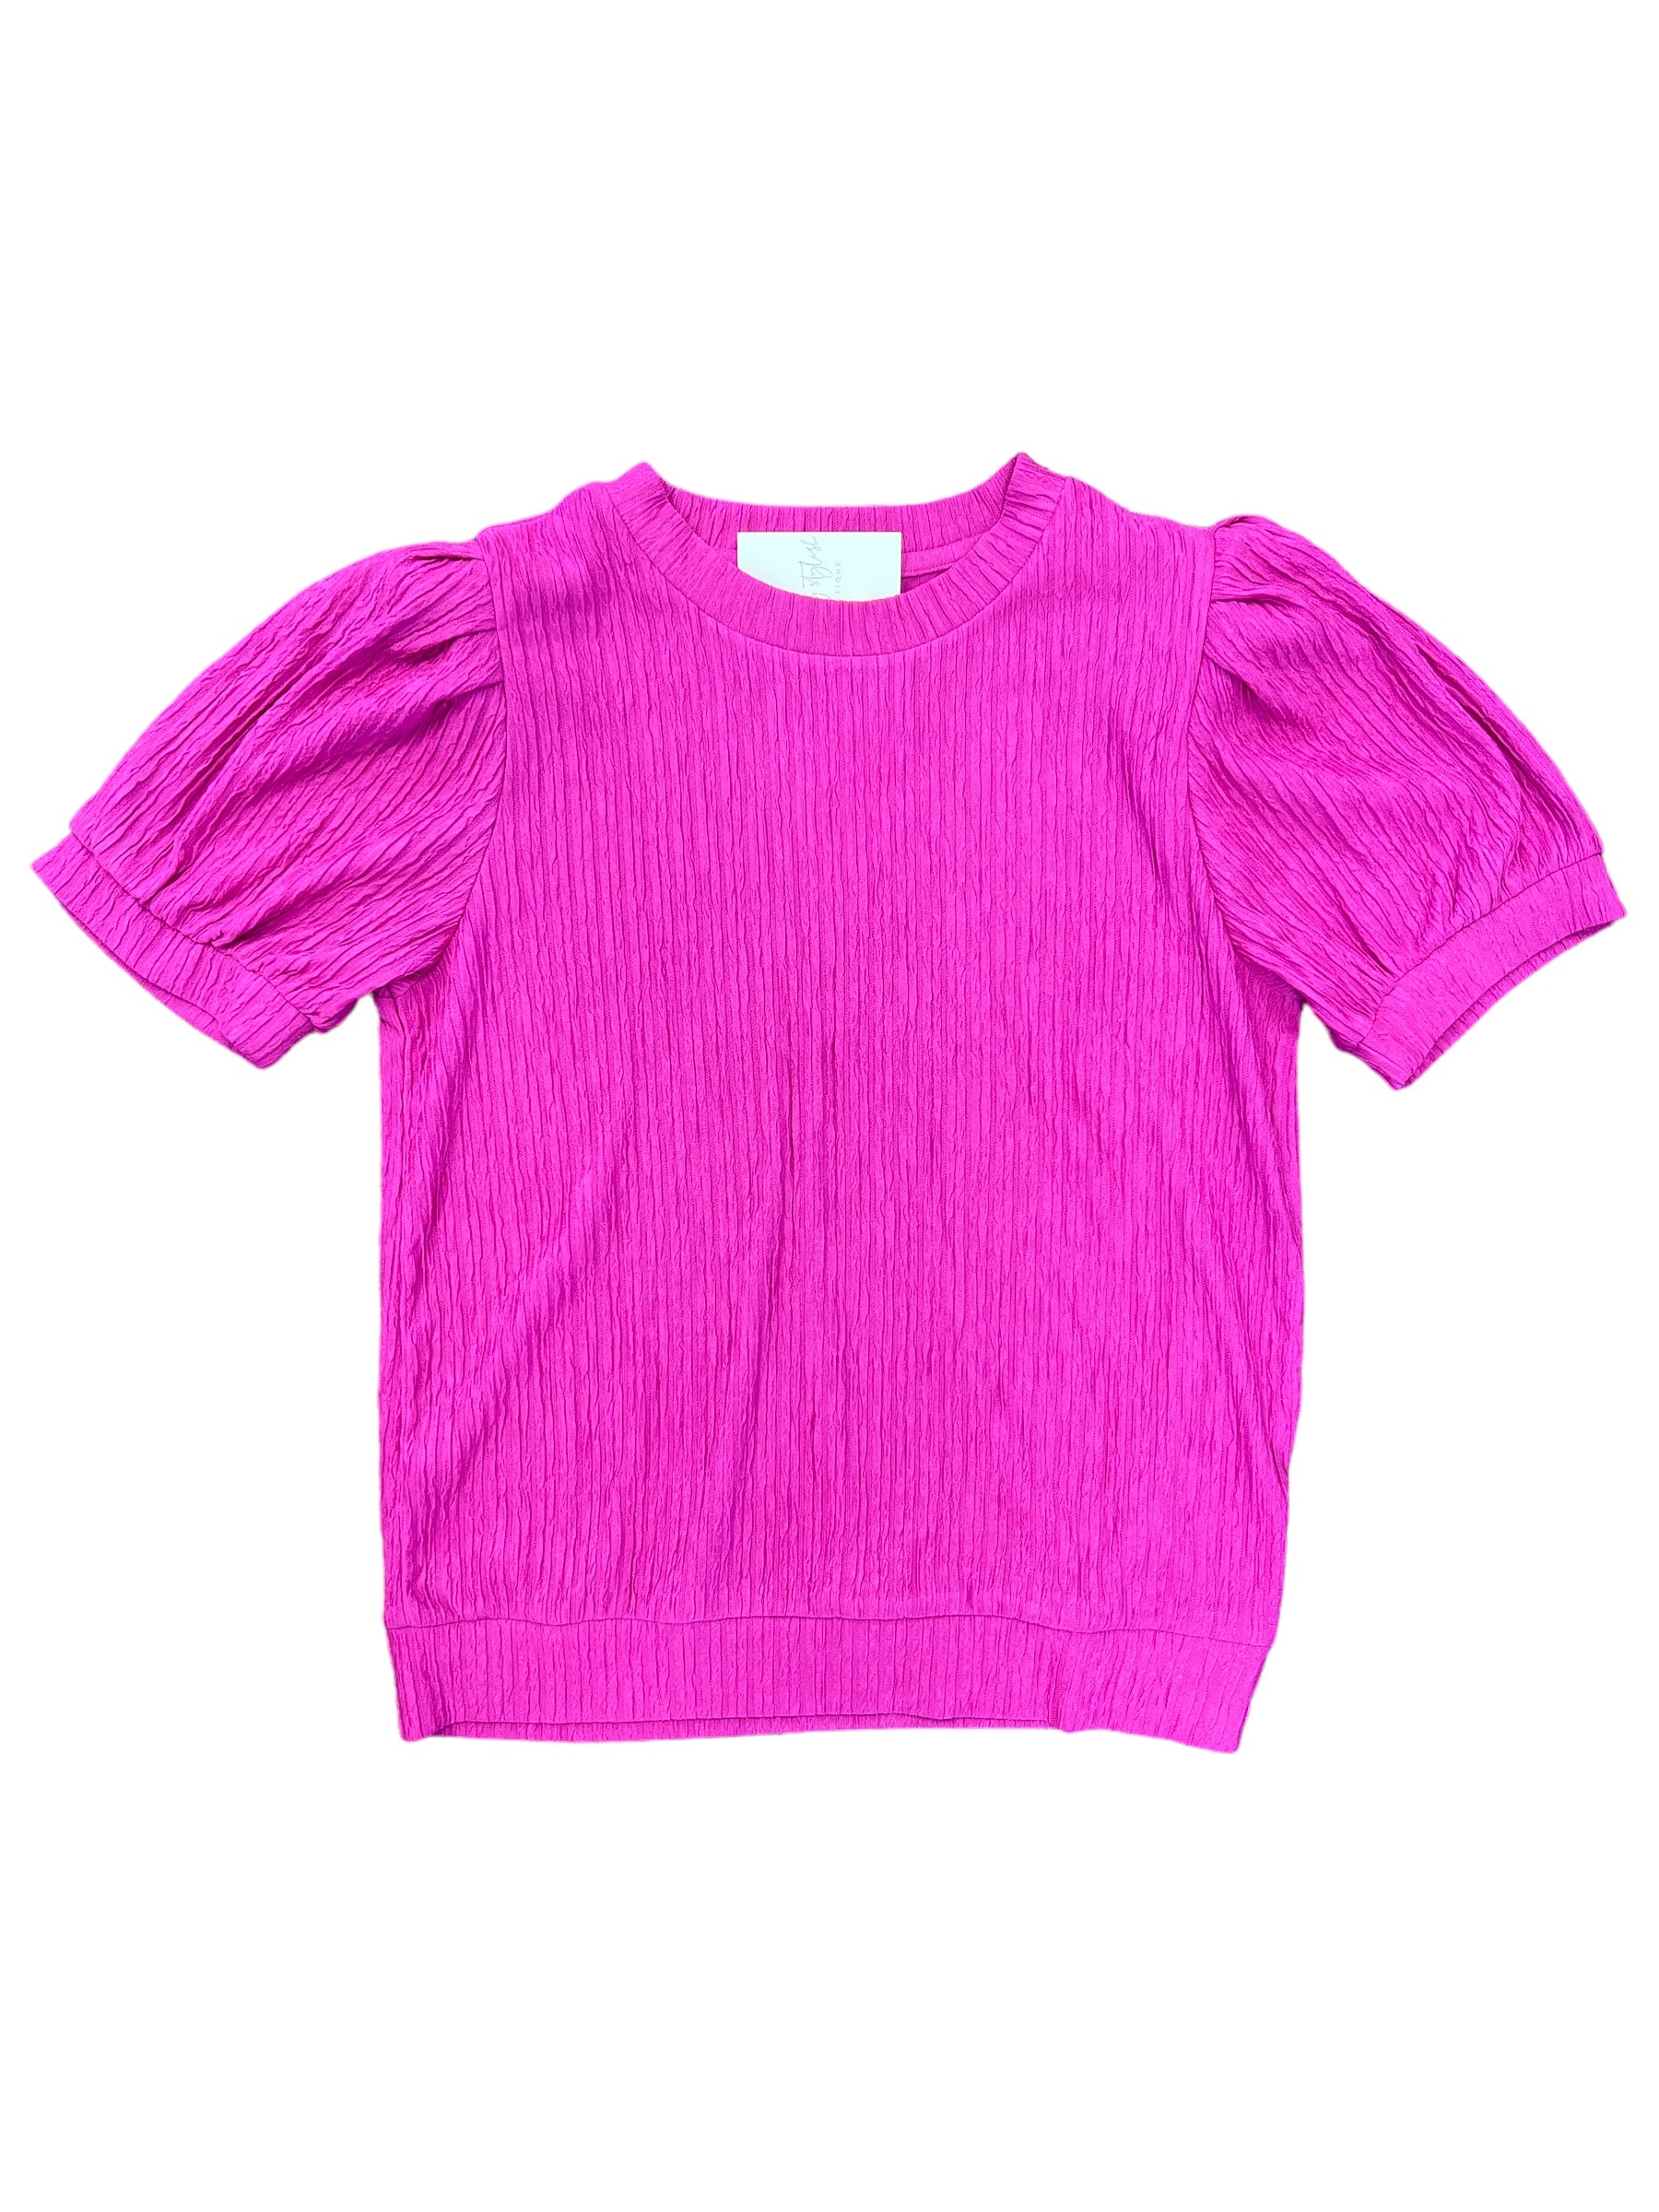 Piper Top-130 Dressy Tops & Blouses-Simply Stylish Boutique-Simply Stylish Boutique | Women’s & Kid’s Fashion | Paducah, KY